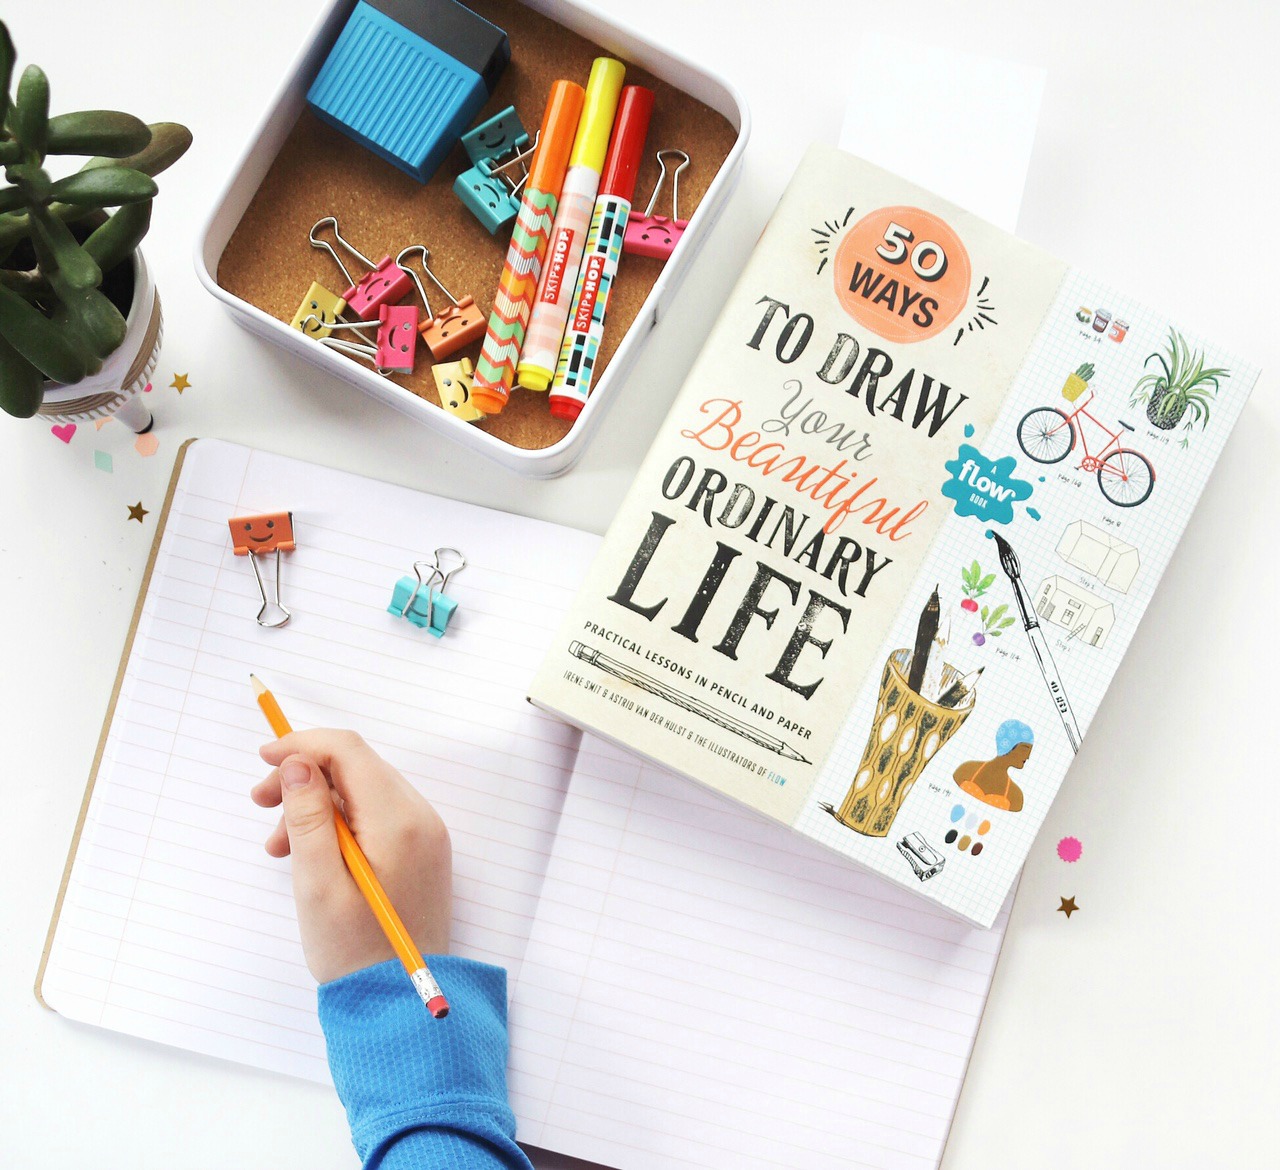 50 Ways to Draw Your Beautiful, Ordinary Life feature image